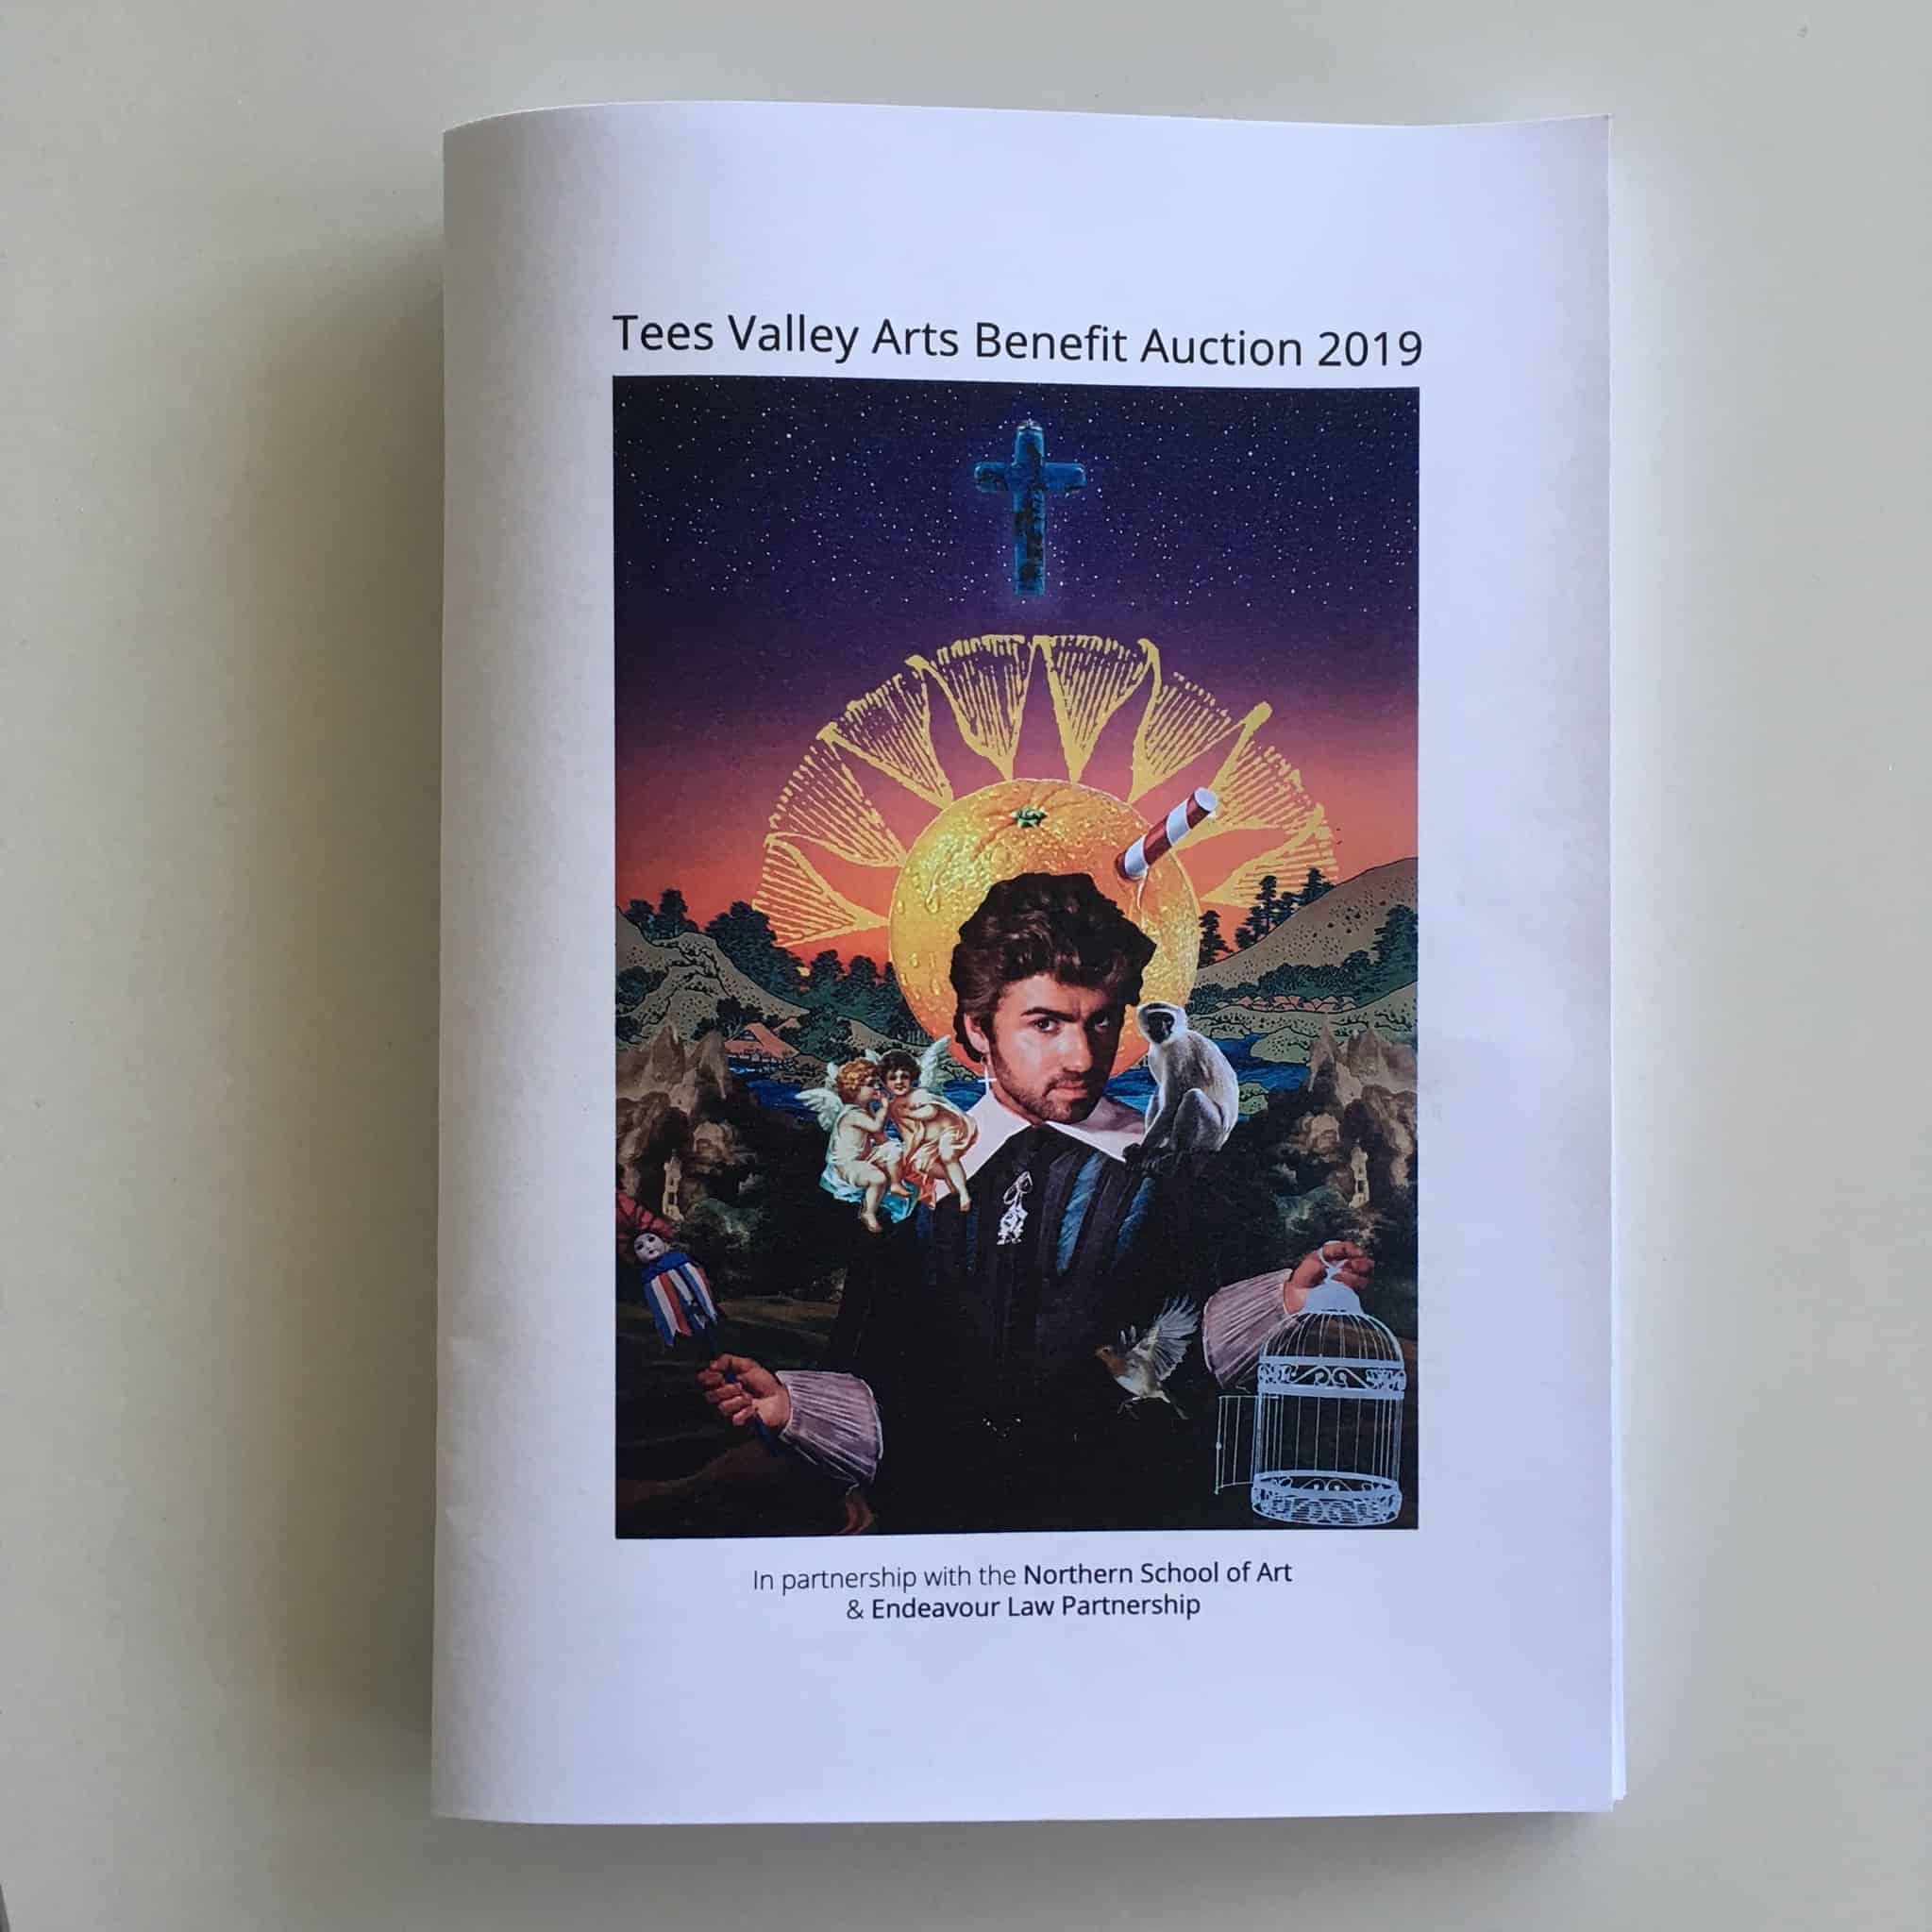 Tees Valley Arts Benefit Auction 2019 Catalogue